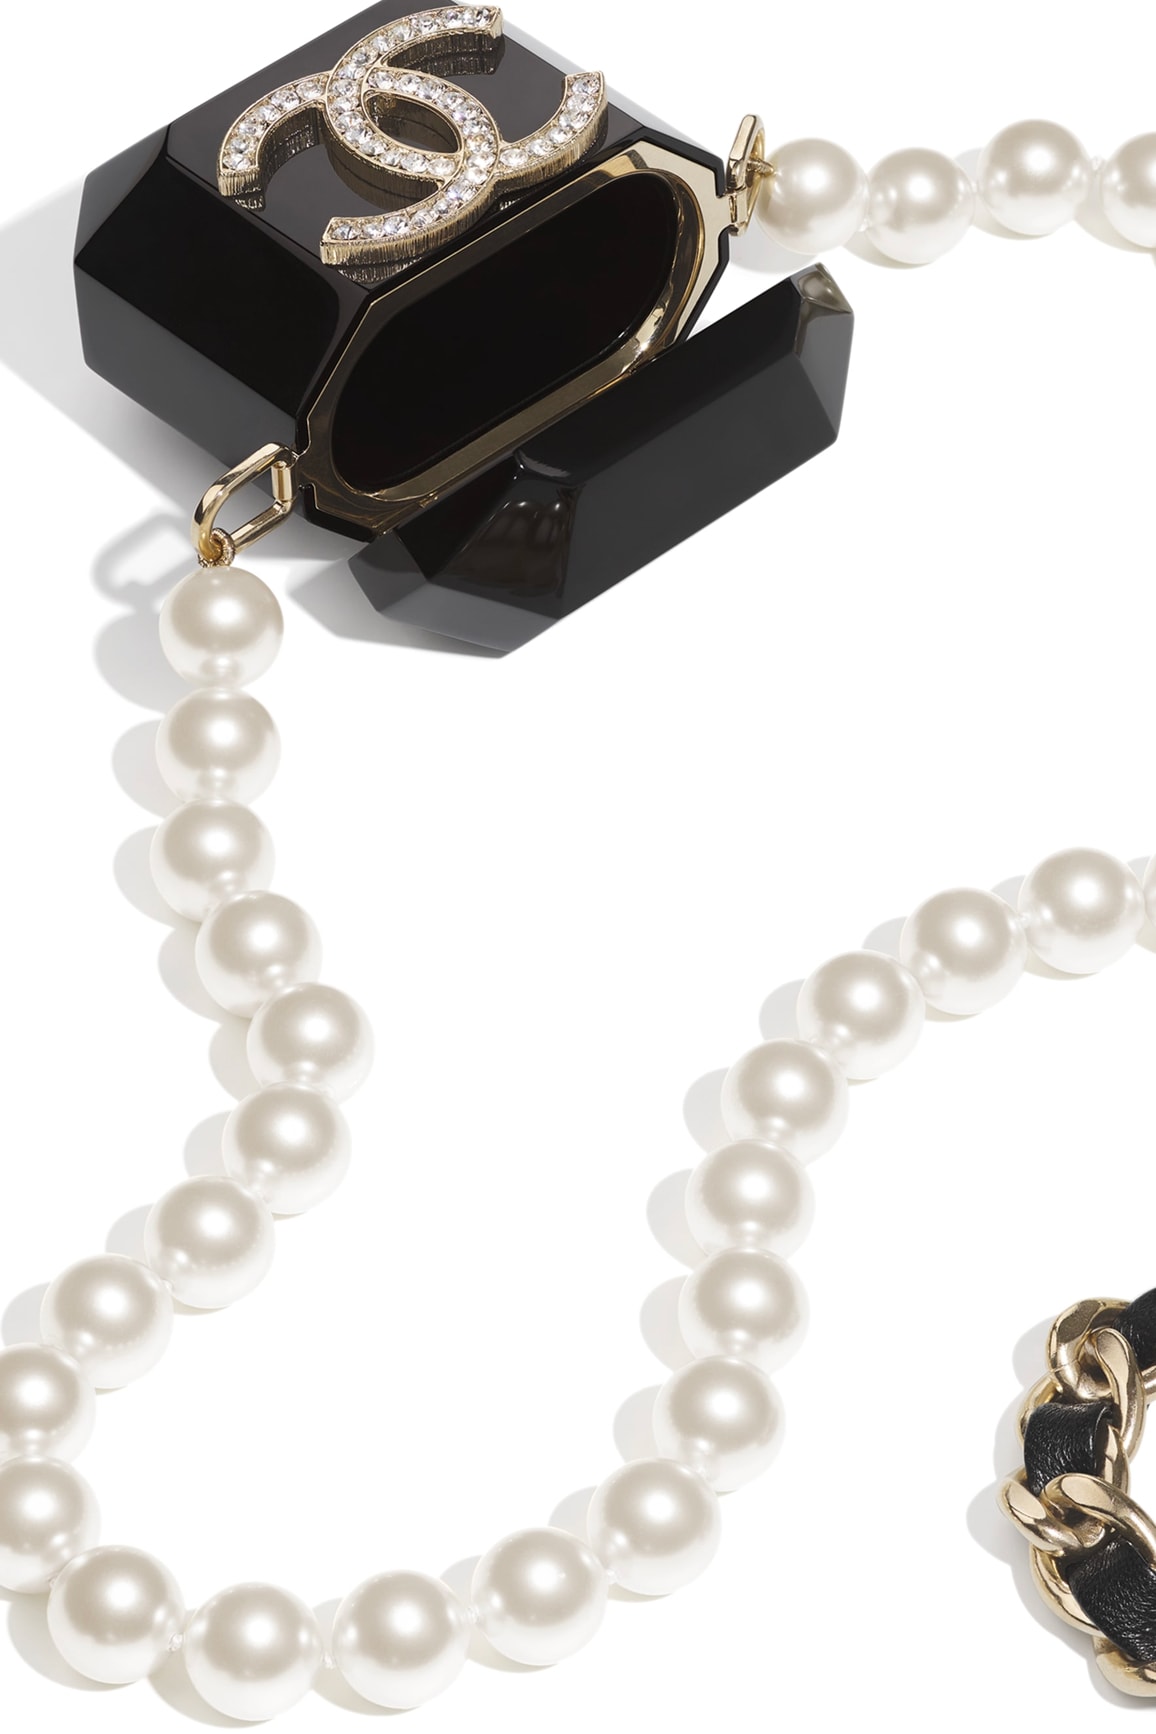 Chanel AP2550B07242 Vanity With Gold And Silver Chain Black / 94305 La –  Italy Station